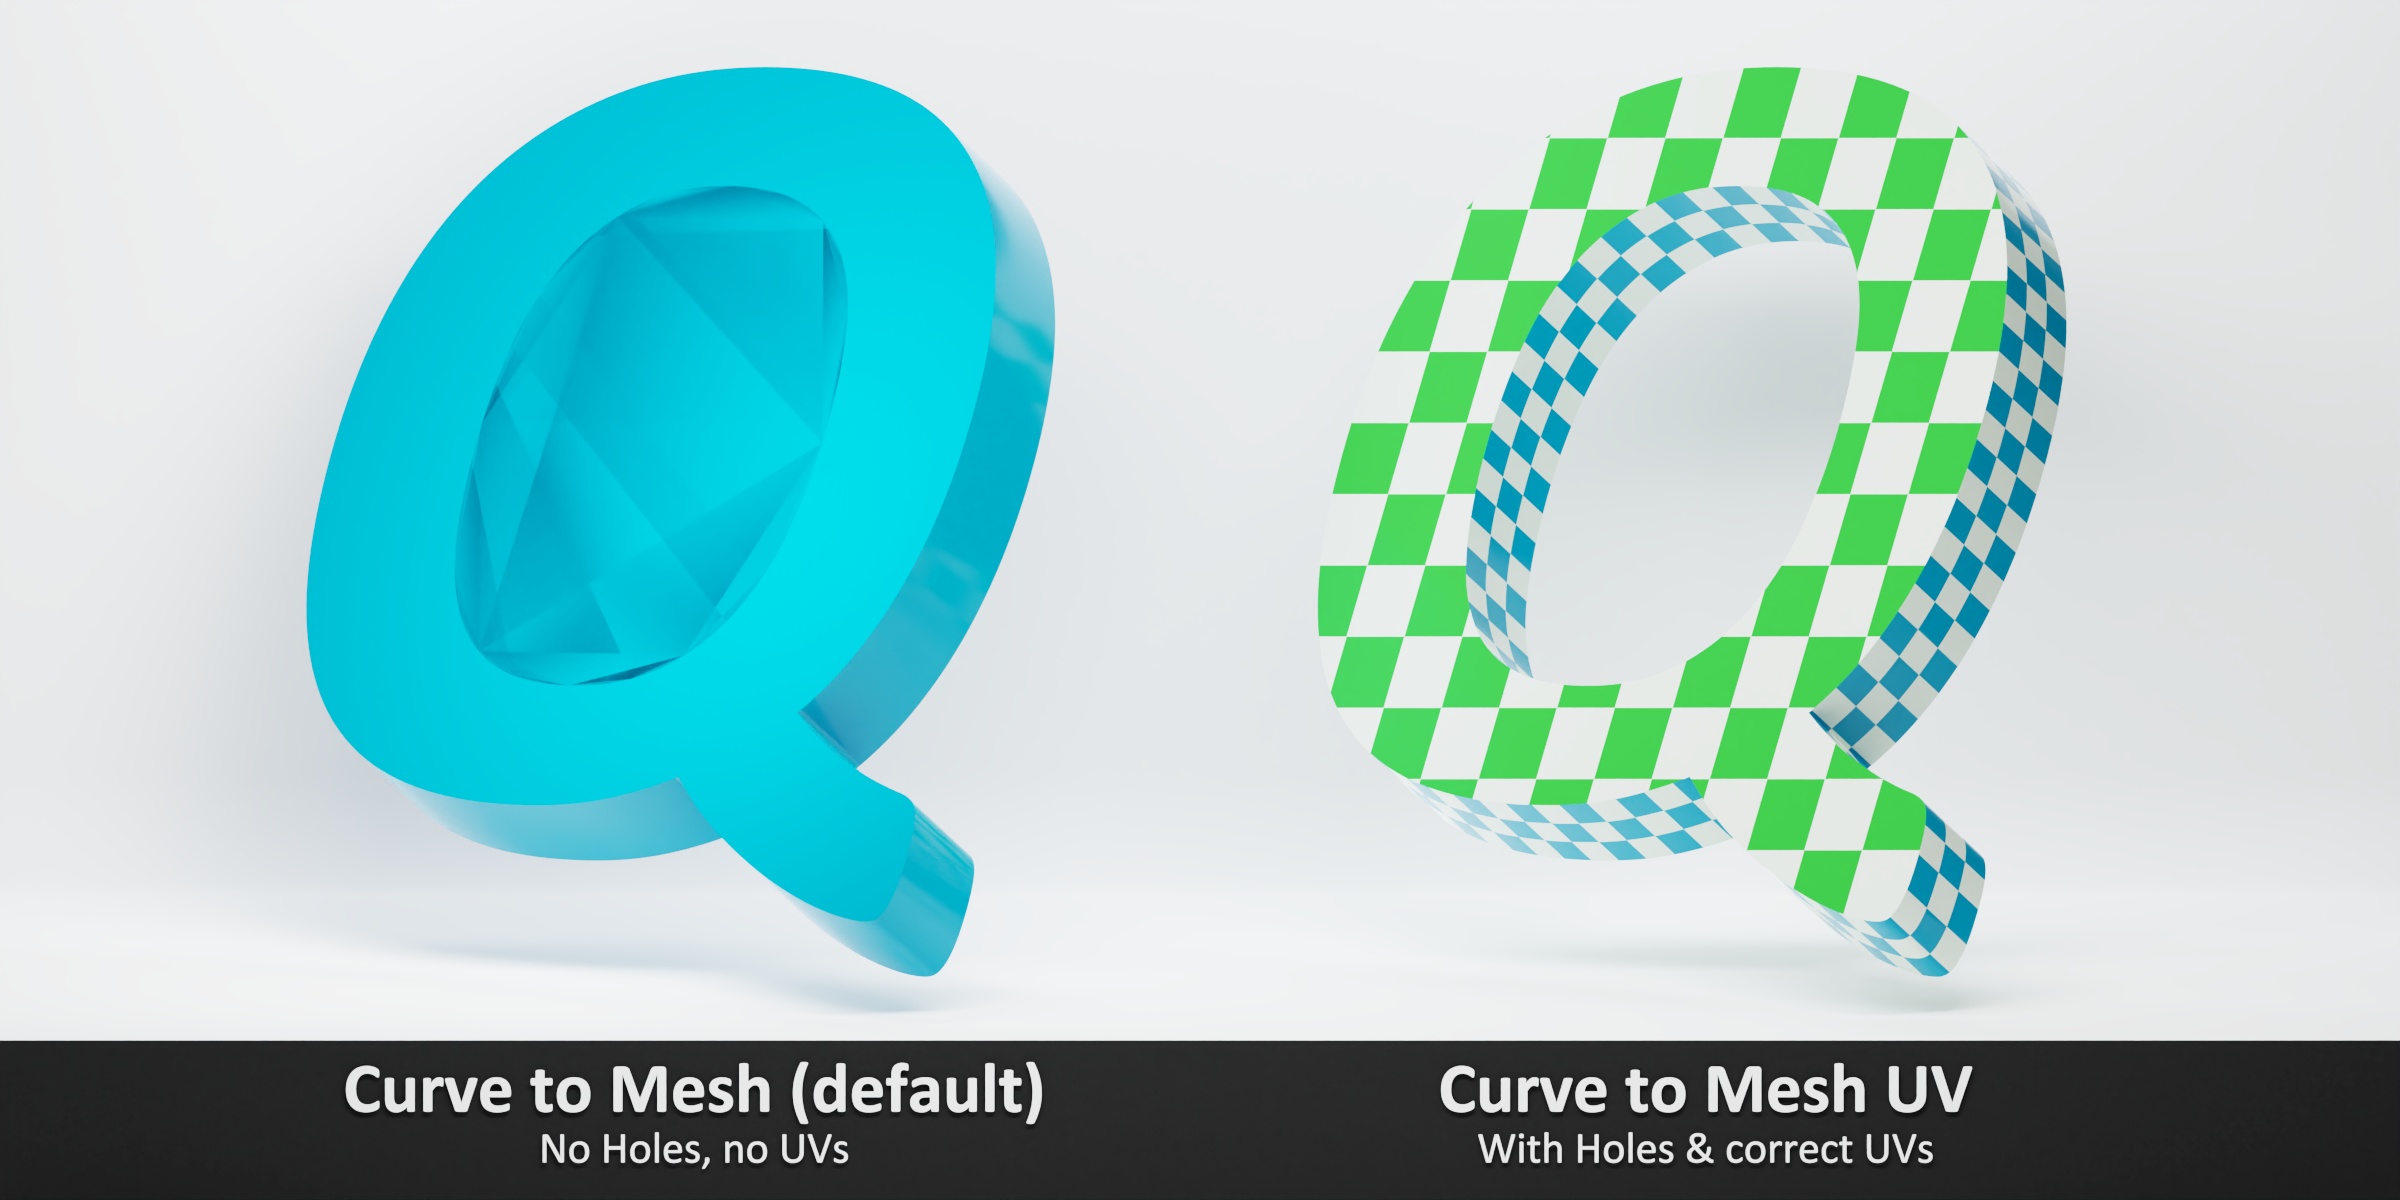 _images/curve-to-mesh_003.jpg